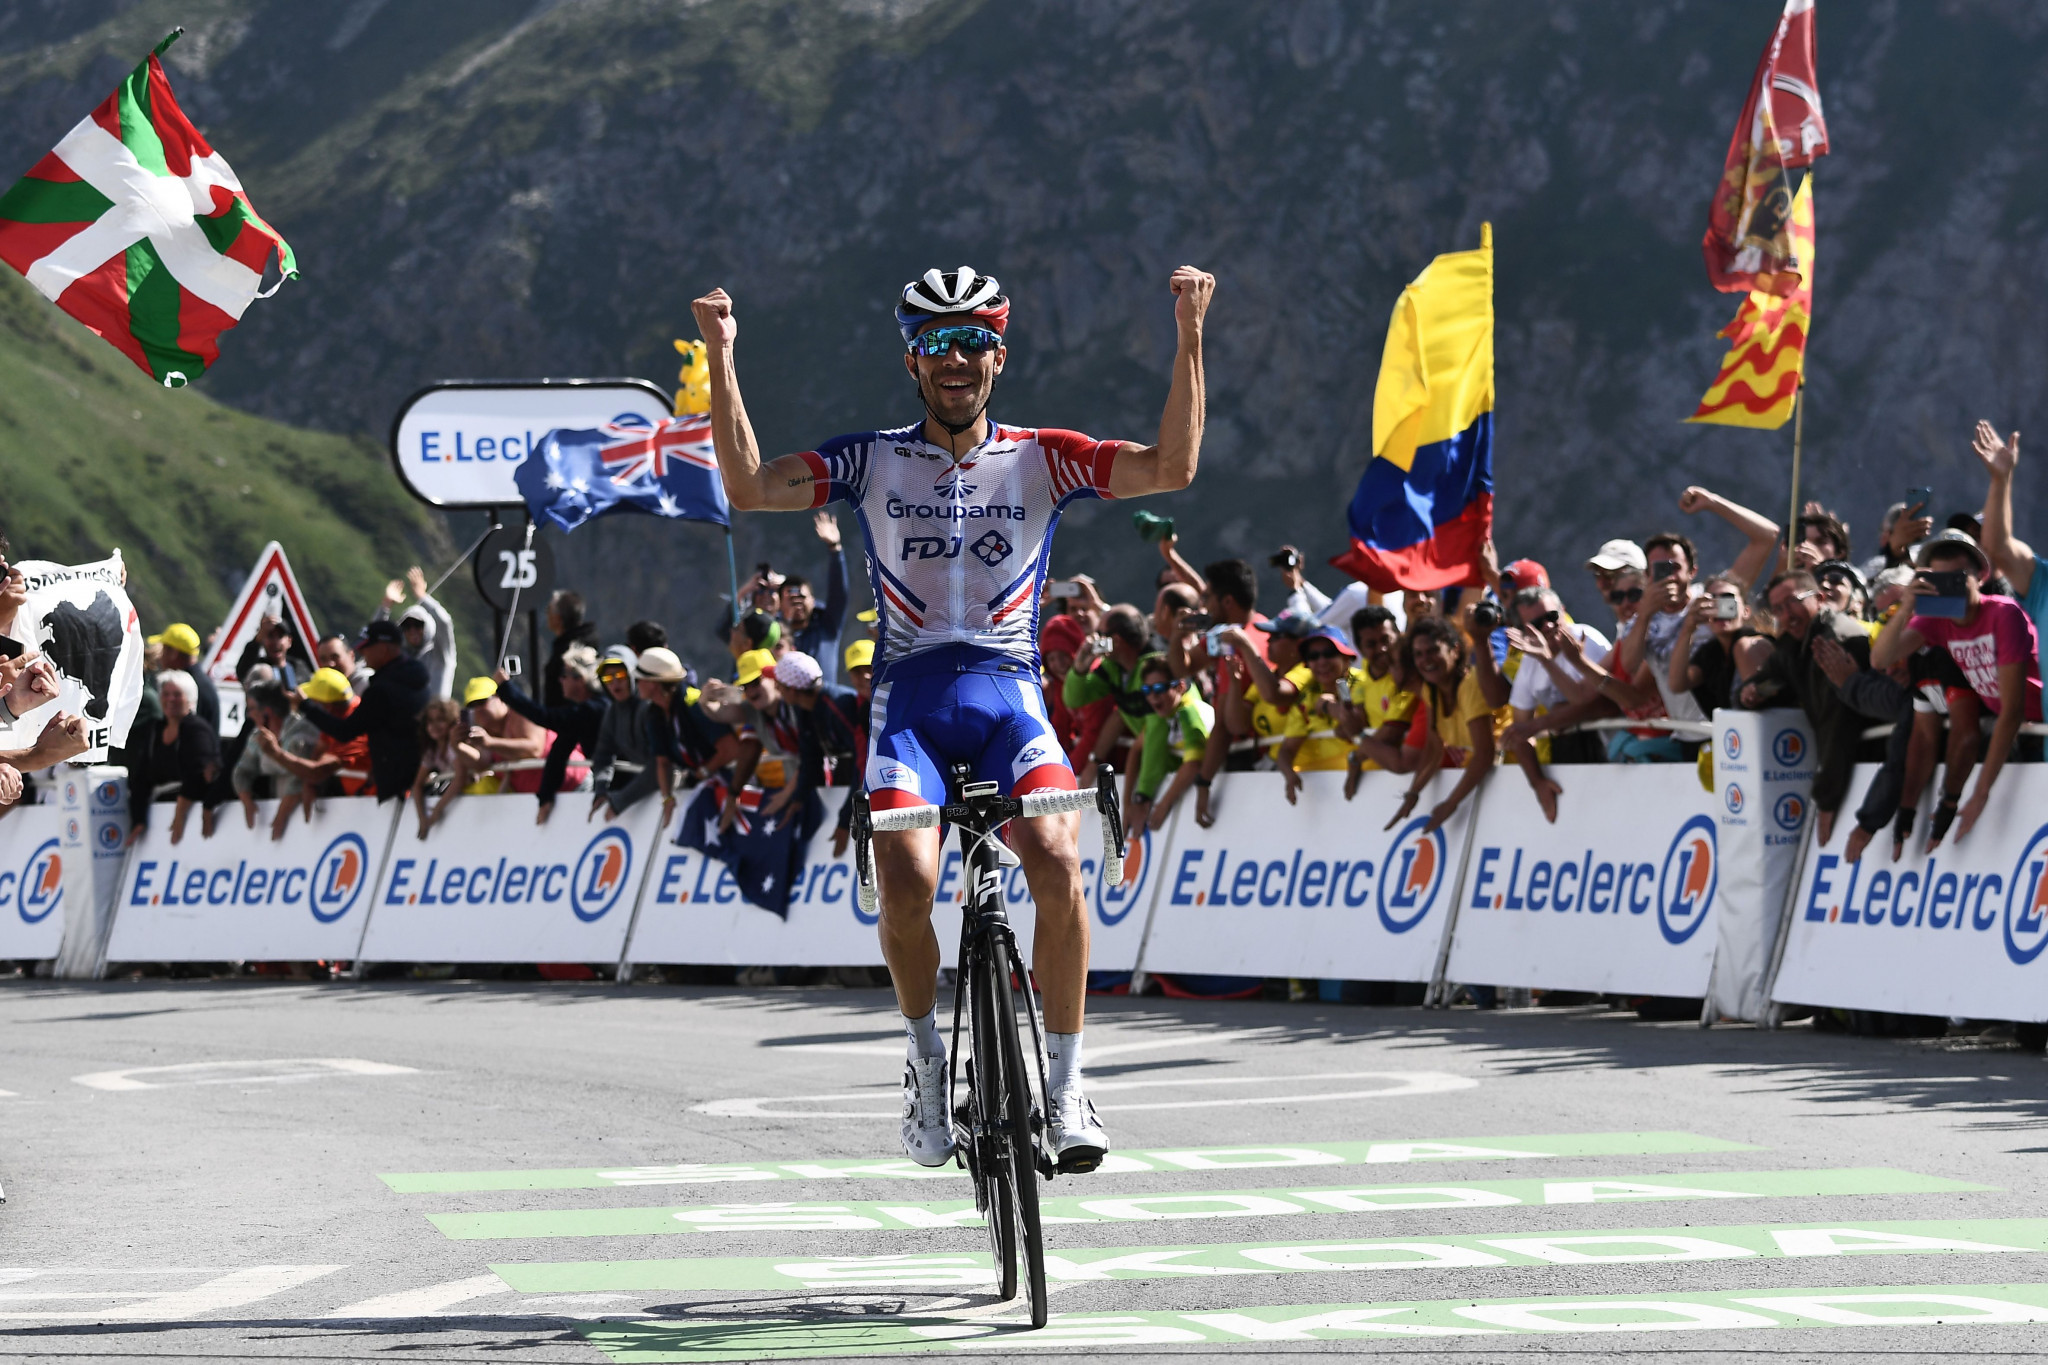 Thibaut Pinot produced a superb display to win stage 14 ©Getty Images